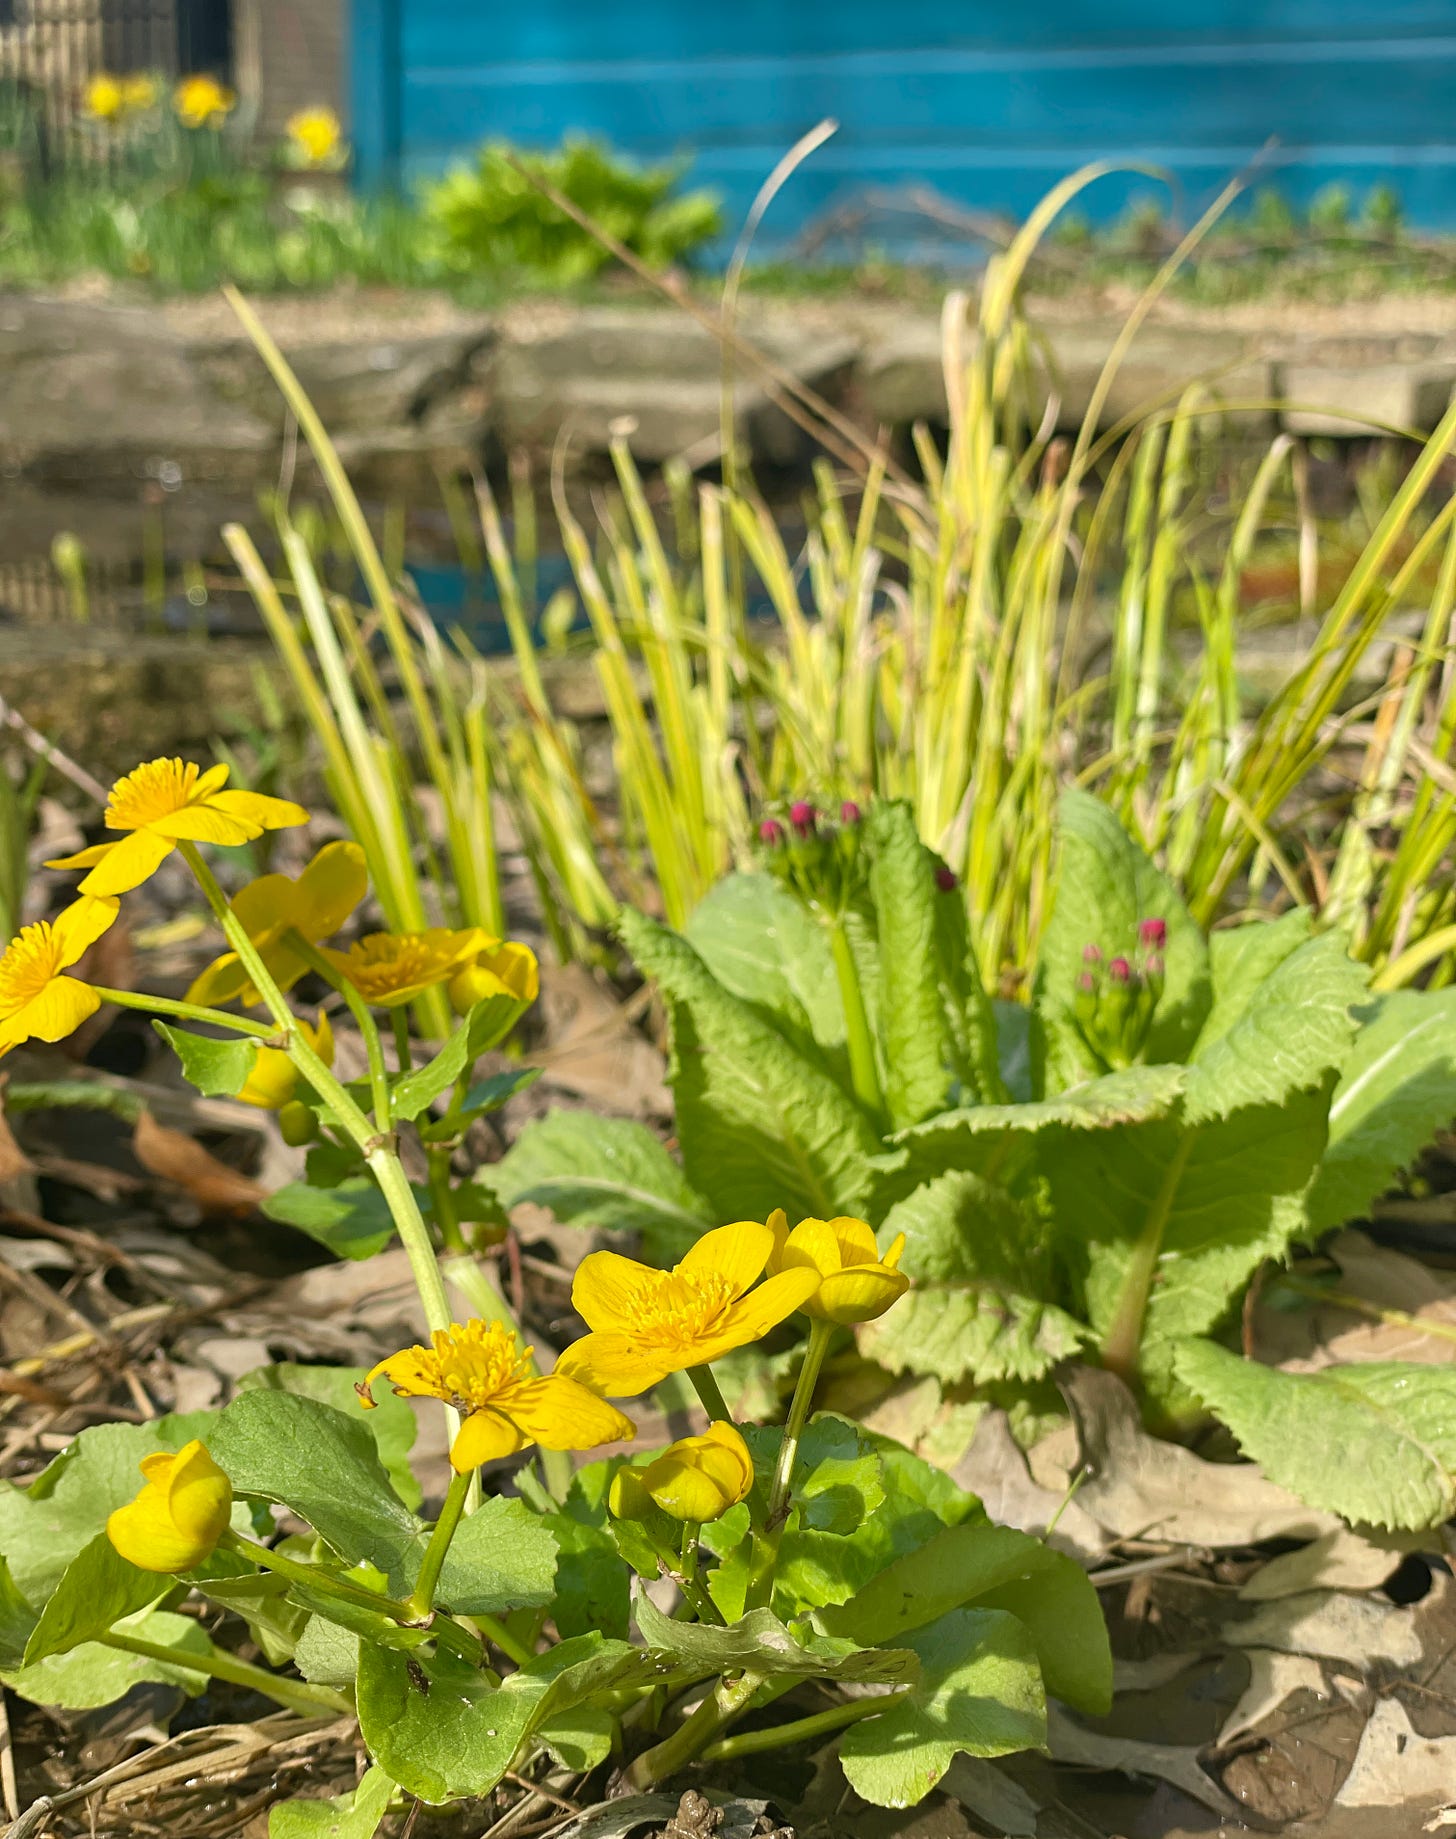 Marsh marigolds, budding Japanese Primula and golden sedge in the bog this morning. What a great combo with our new potting shed color! Looking forward to seeing how the vibrant blue sets off the plants this year on all sides. 